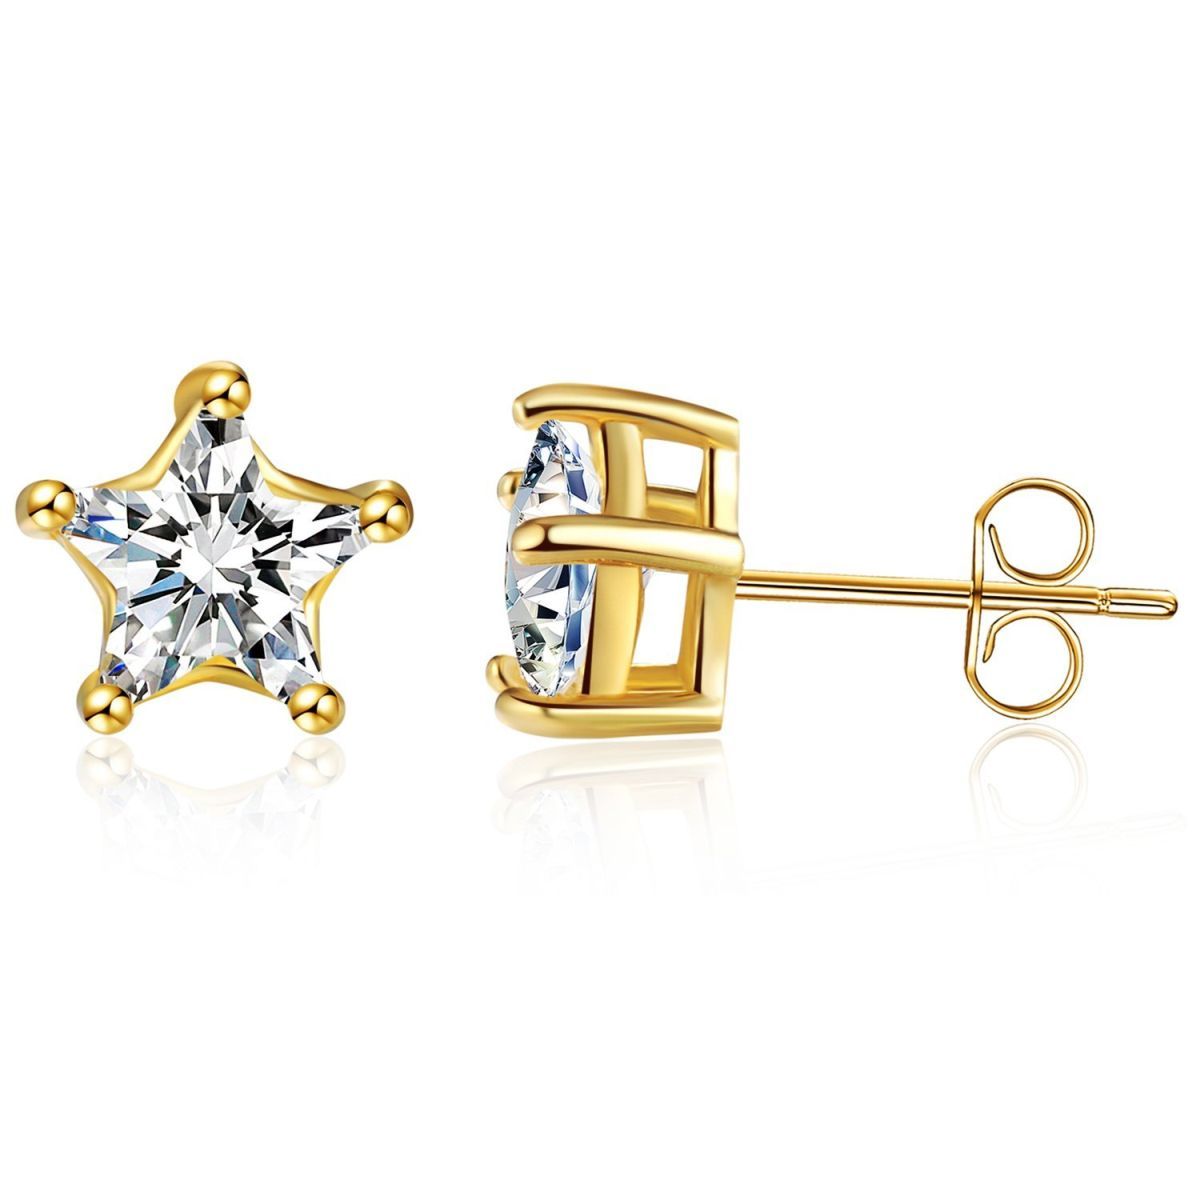 Solitaire Star Cut Cz With Brass Gold Ear Stud Pair Earring